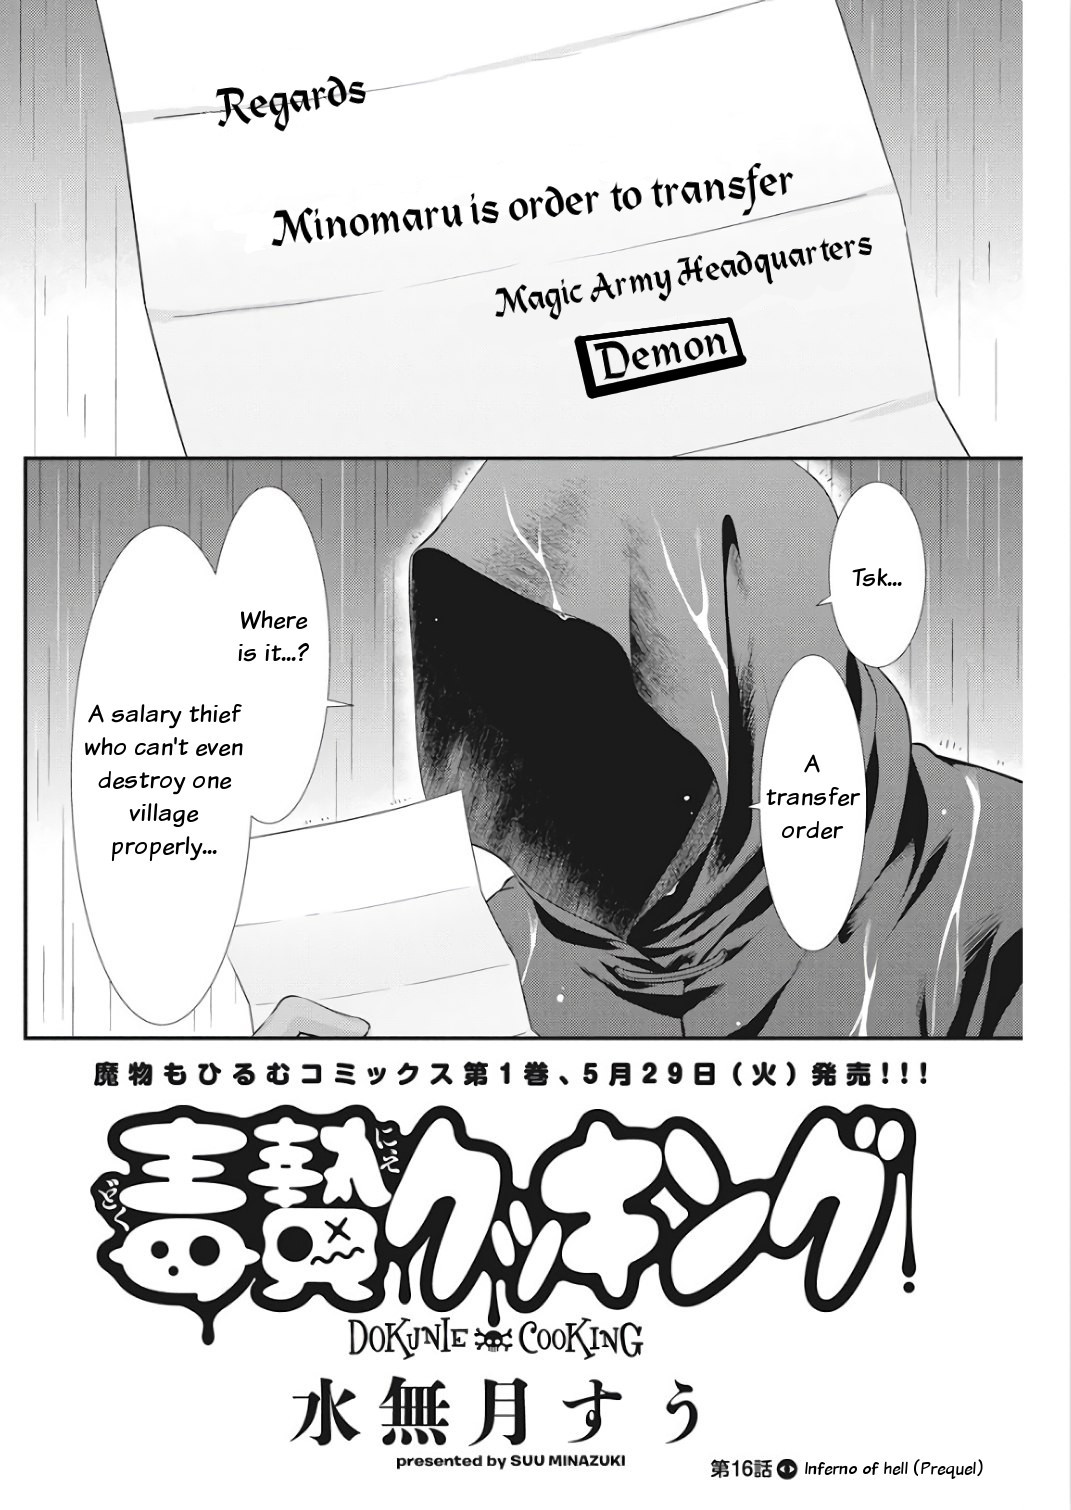 Dokunie Cooking Ch. 16 Inferno of hell (Prequel)